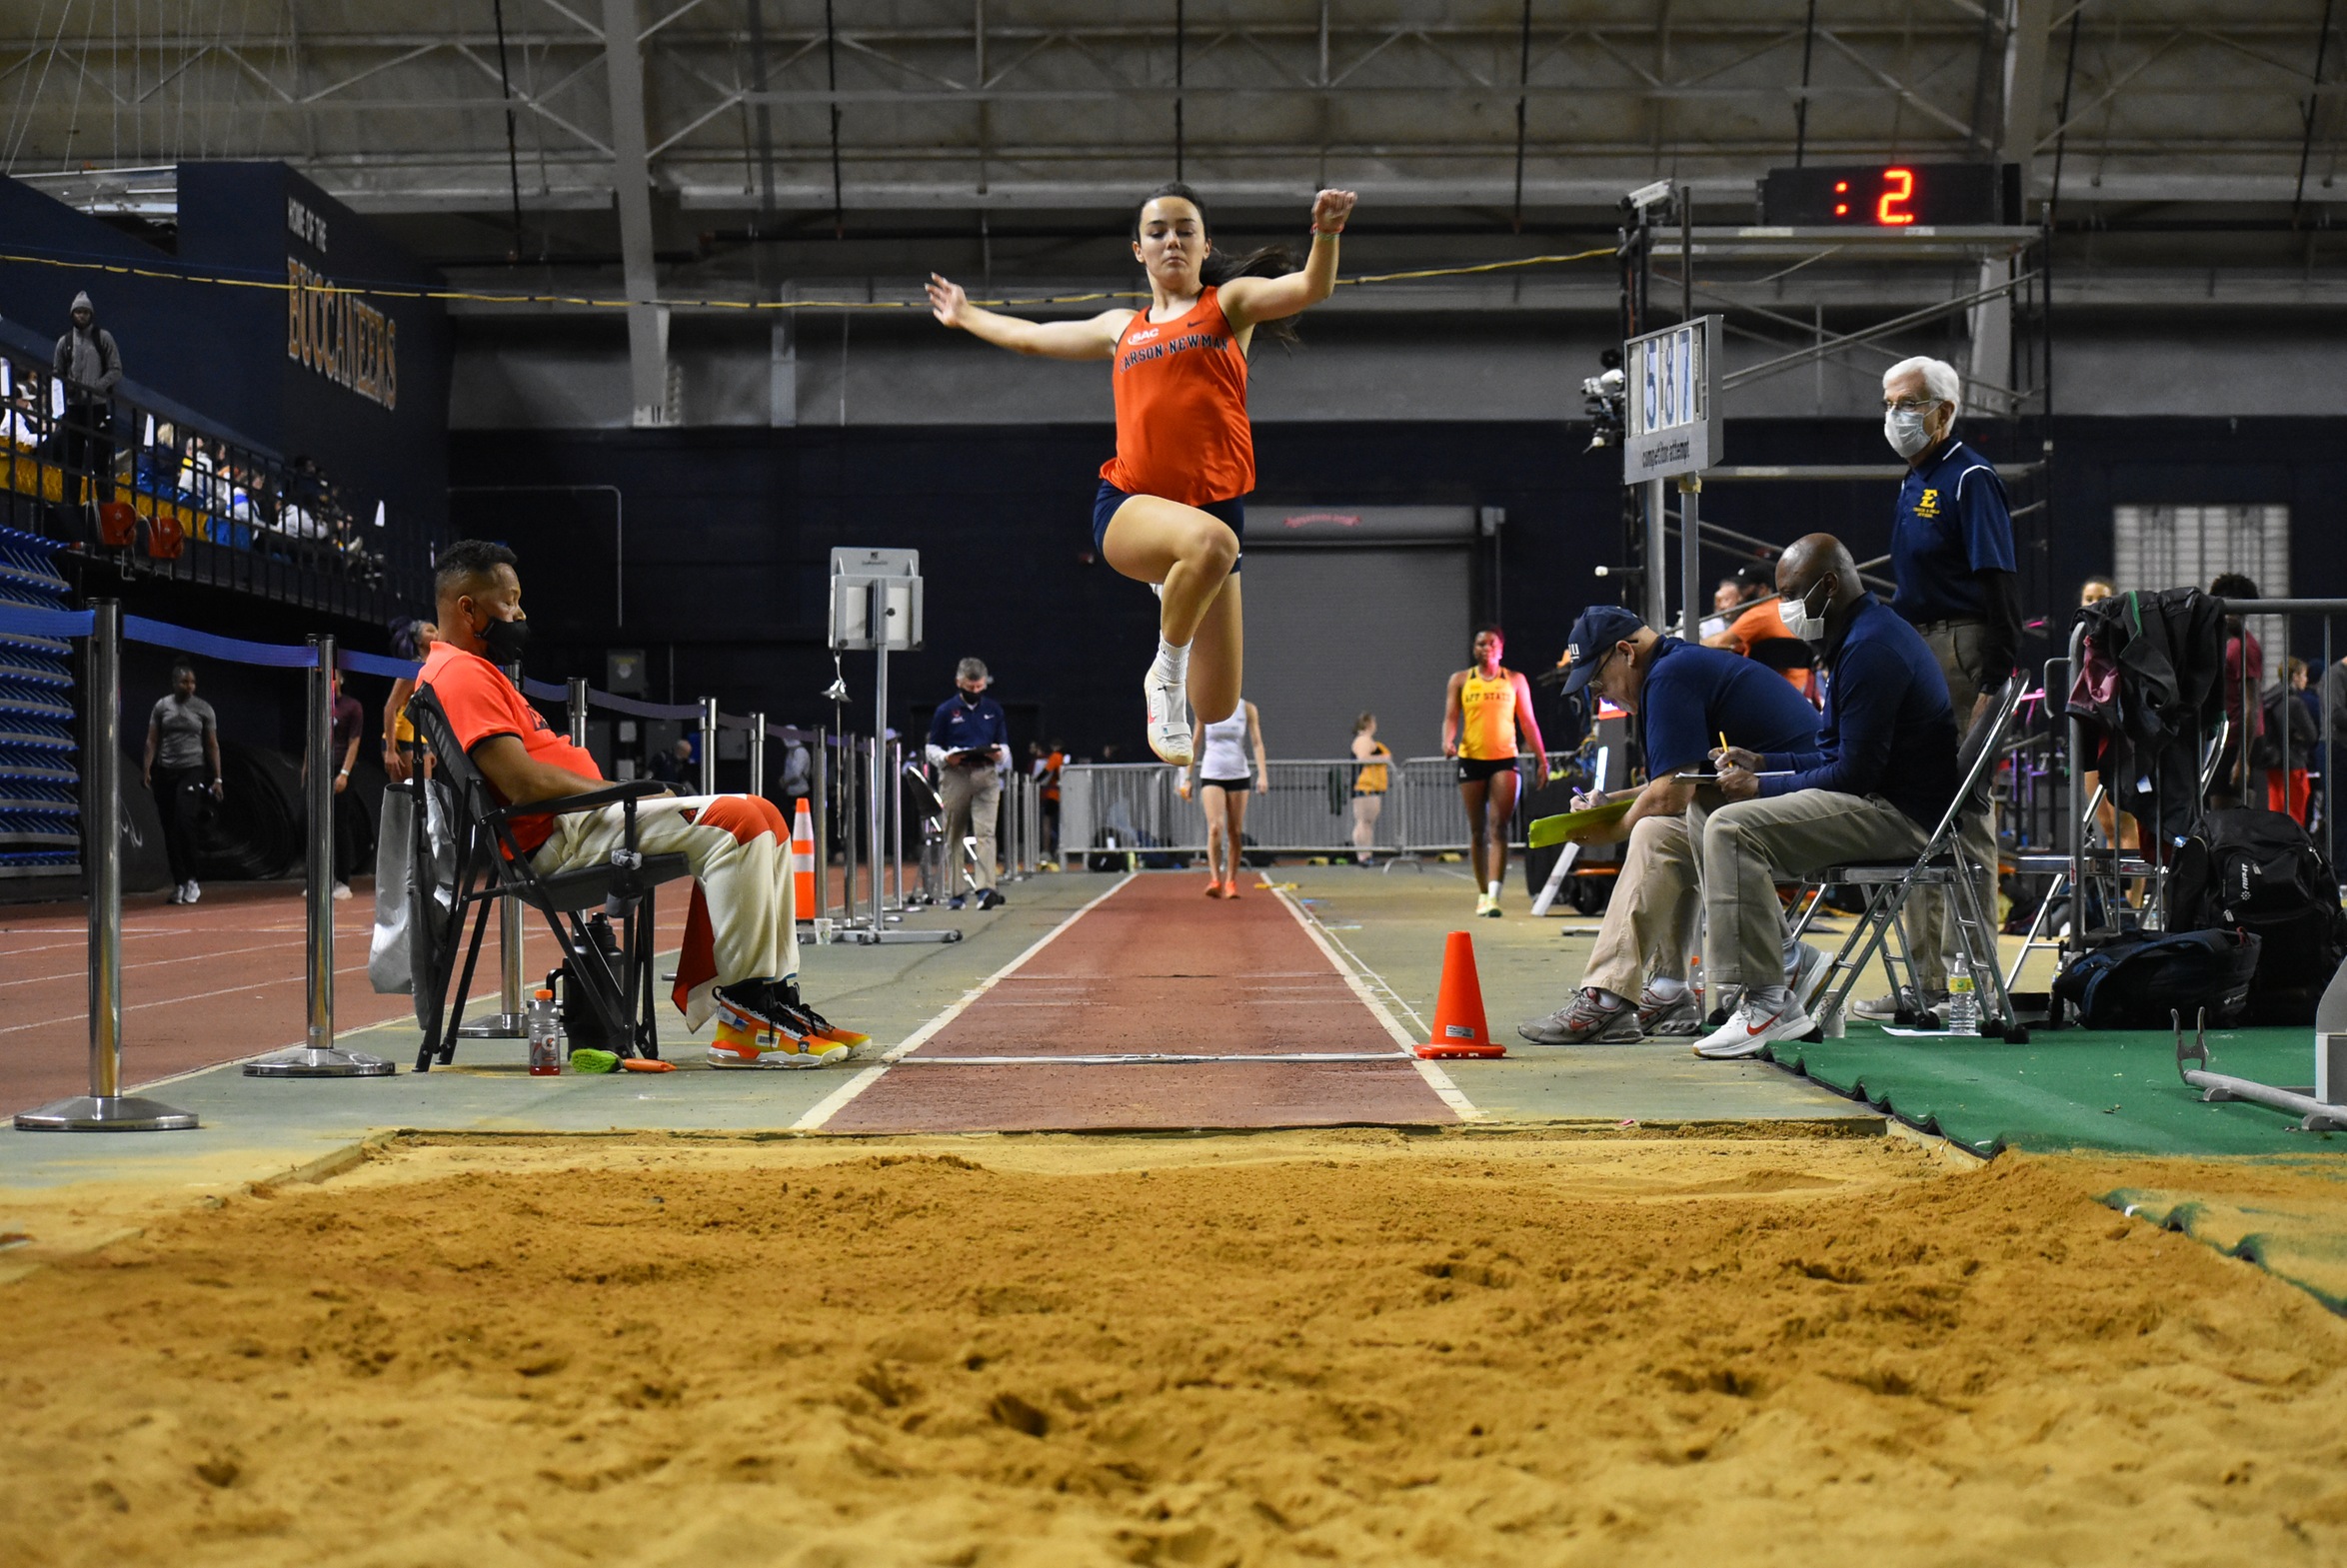 Eagles return to Buc Dome for Buccaneer Invitational